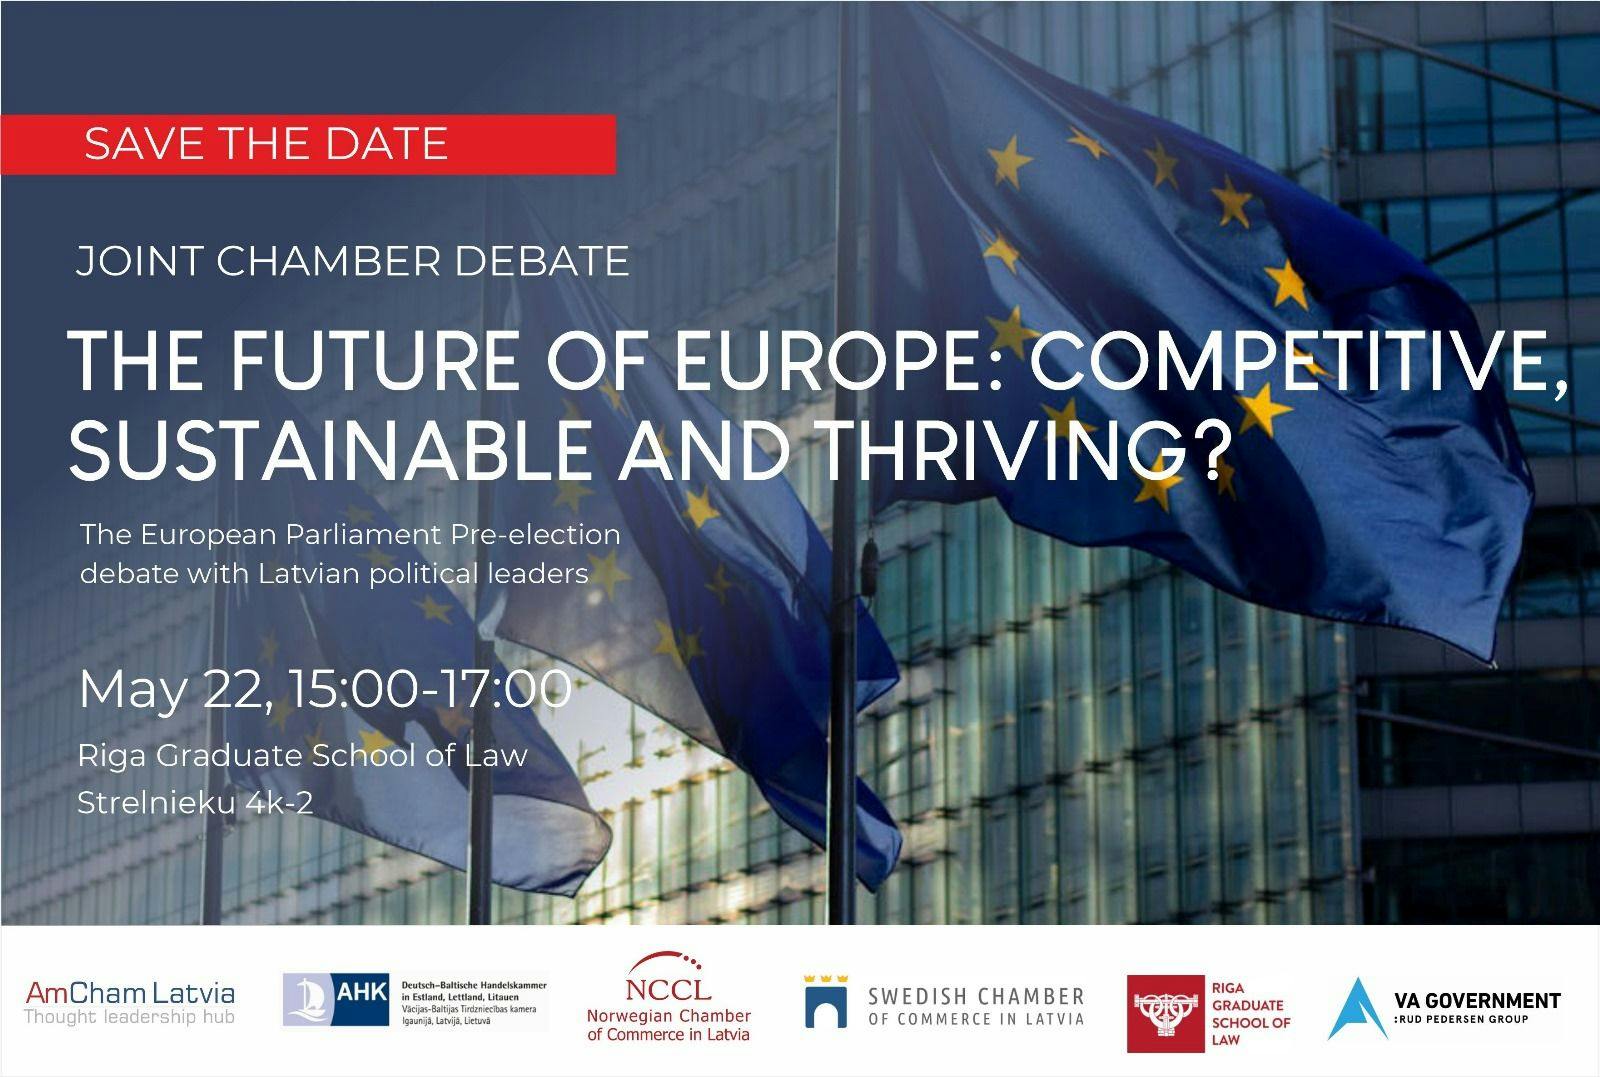 Joint Chamber Debate: The Future of Europe: Competitive, Sustainable and Thriving?